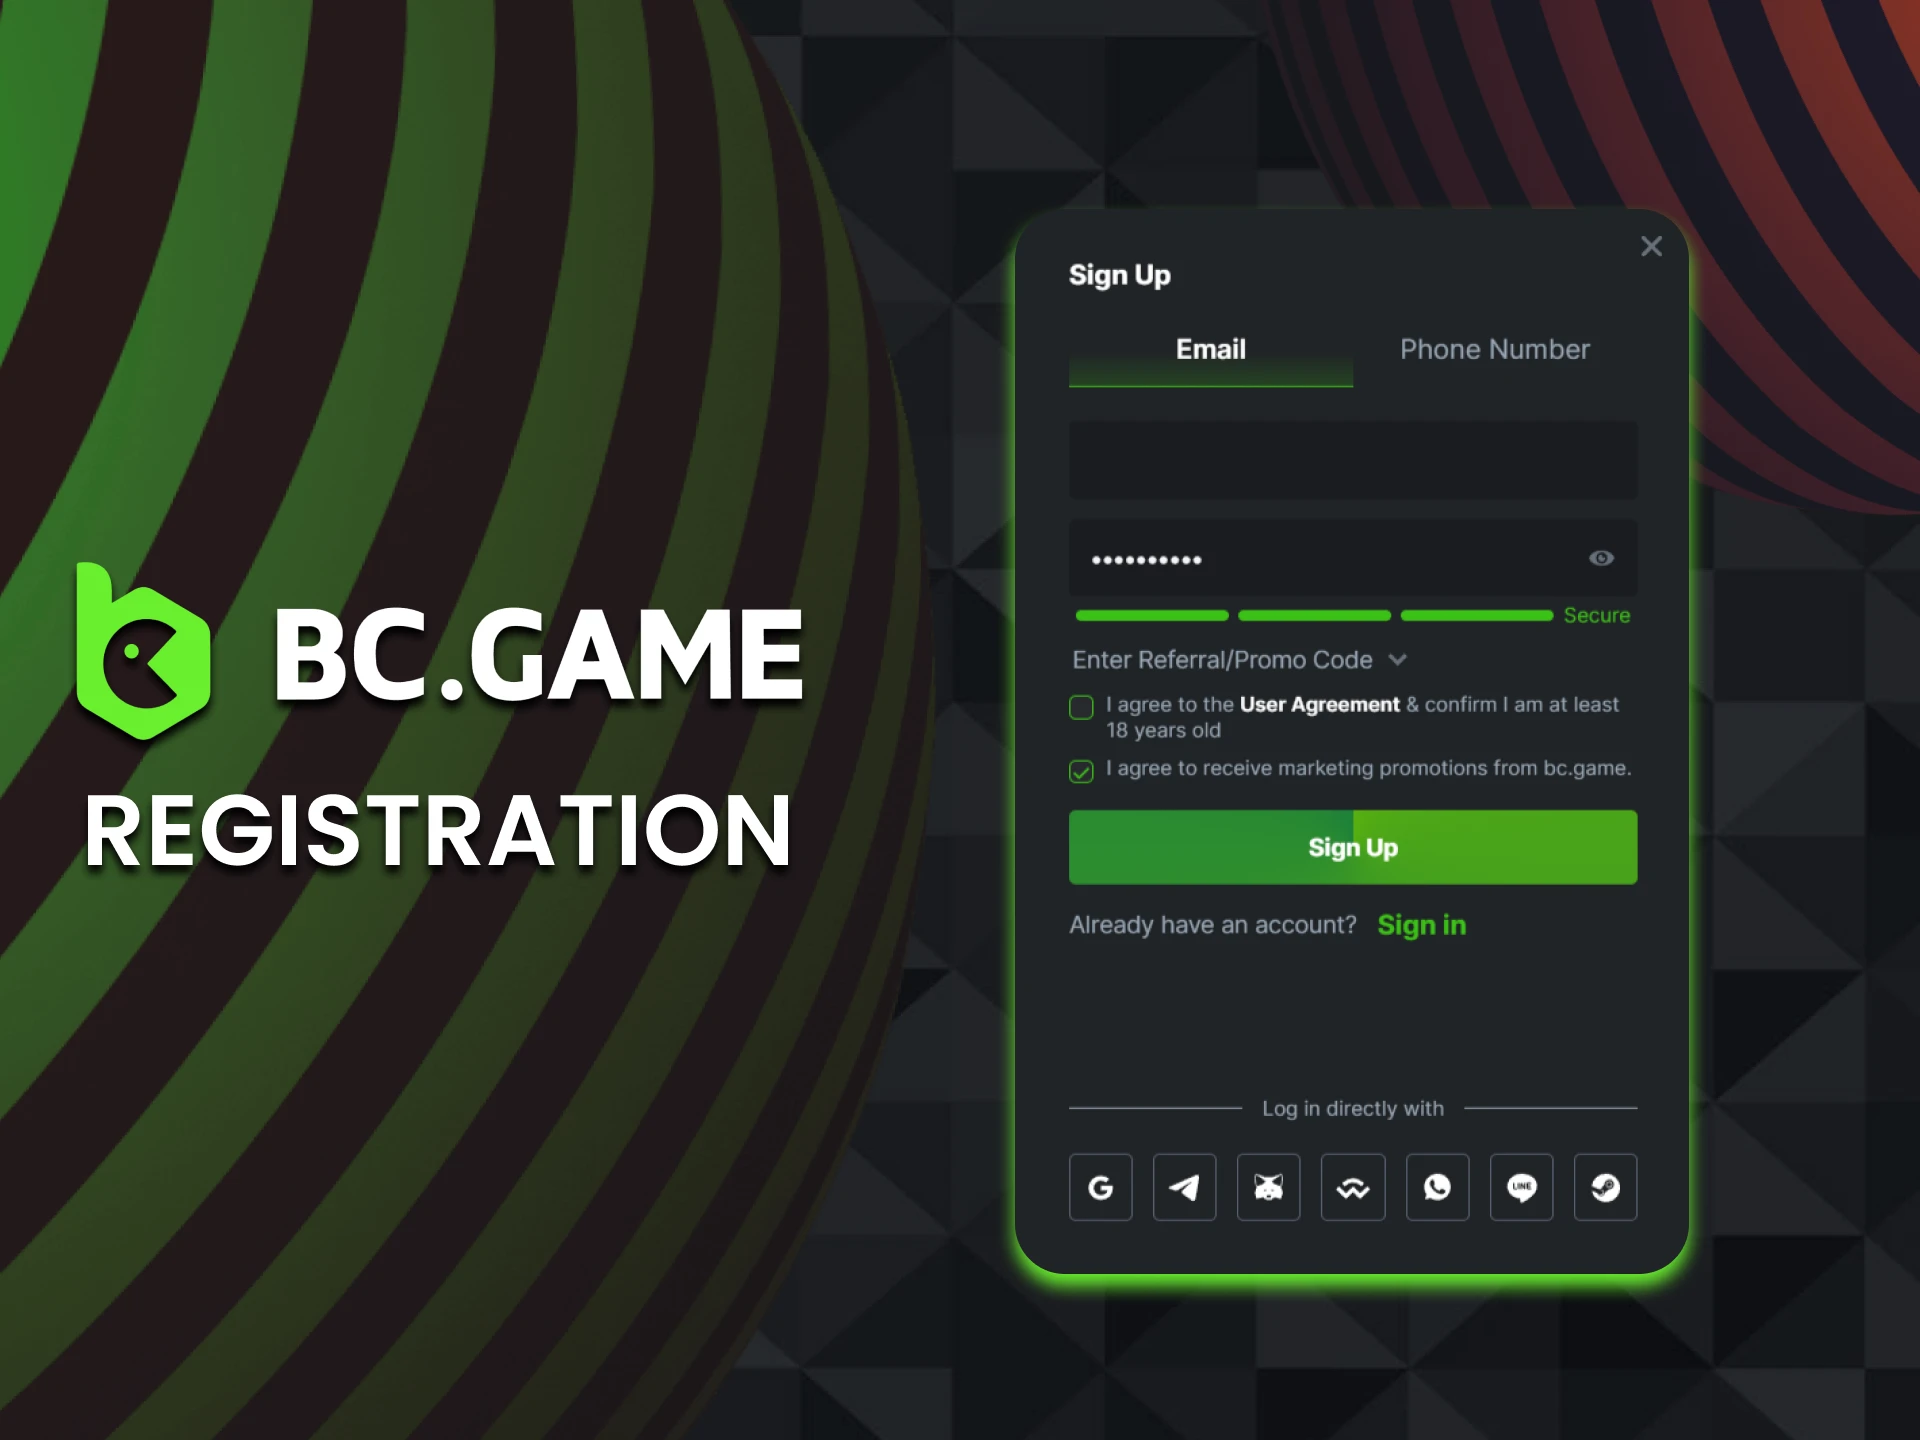 Visit the official BC Game website to register an account.